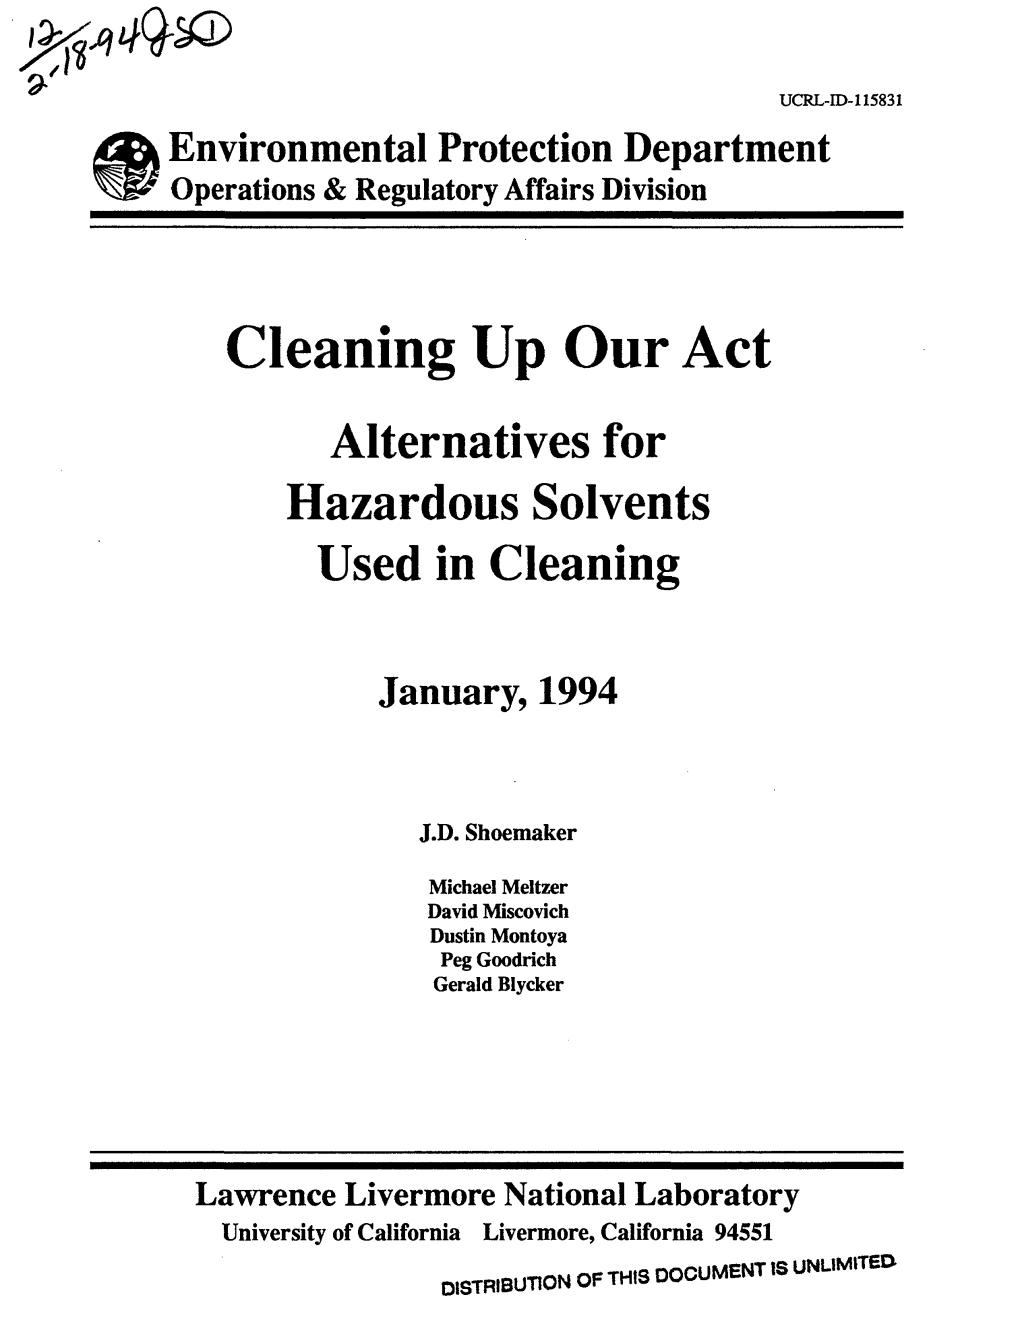 Alternatives for Hazardous Solvents Used in Cleaning